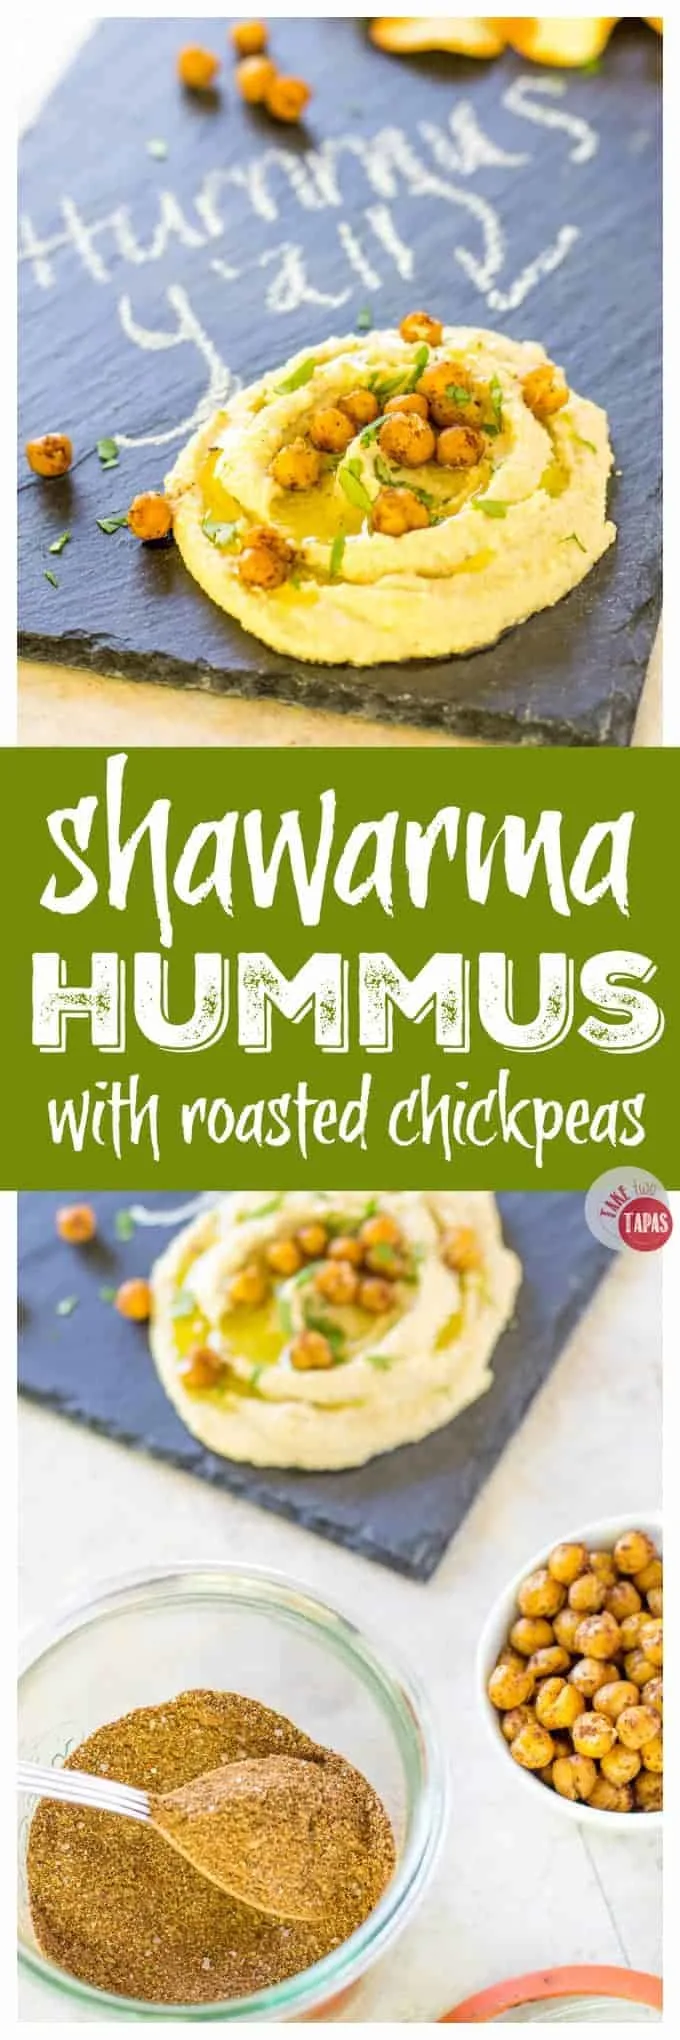 Pinterest collage image with text "Shawarma Hummus with roasted chickpeas"